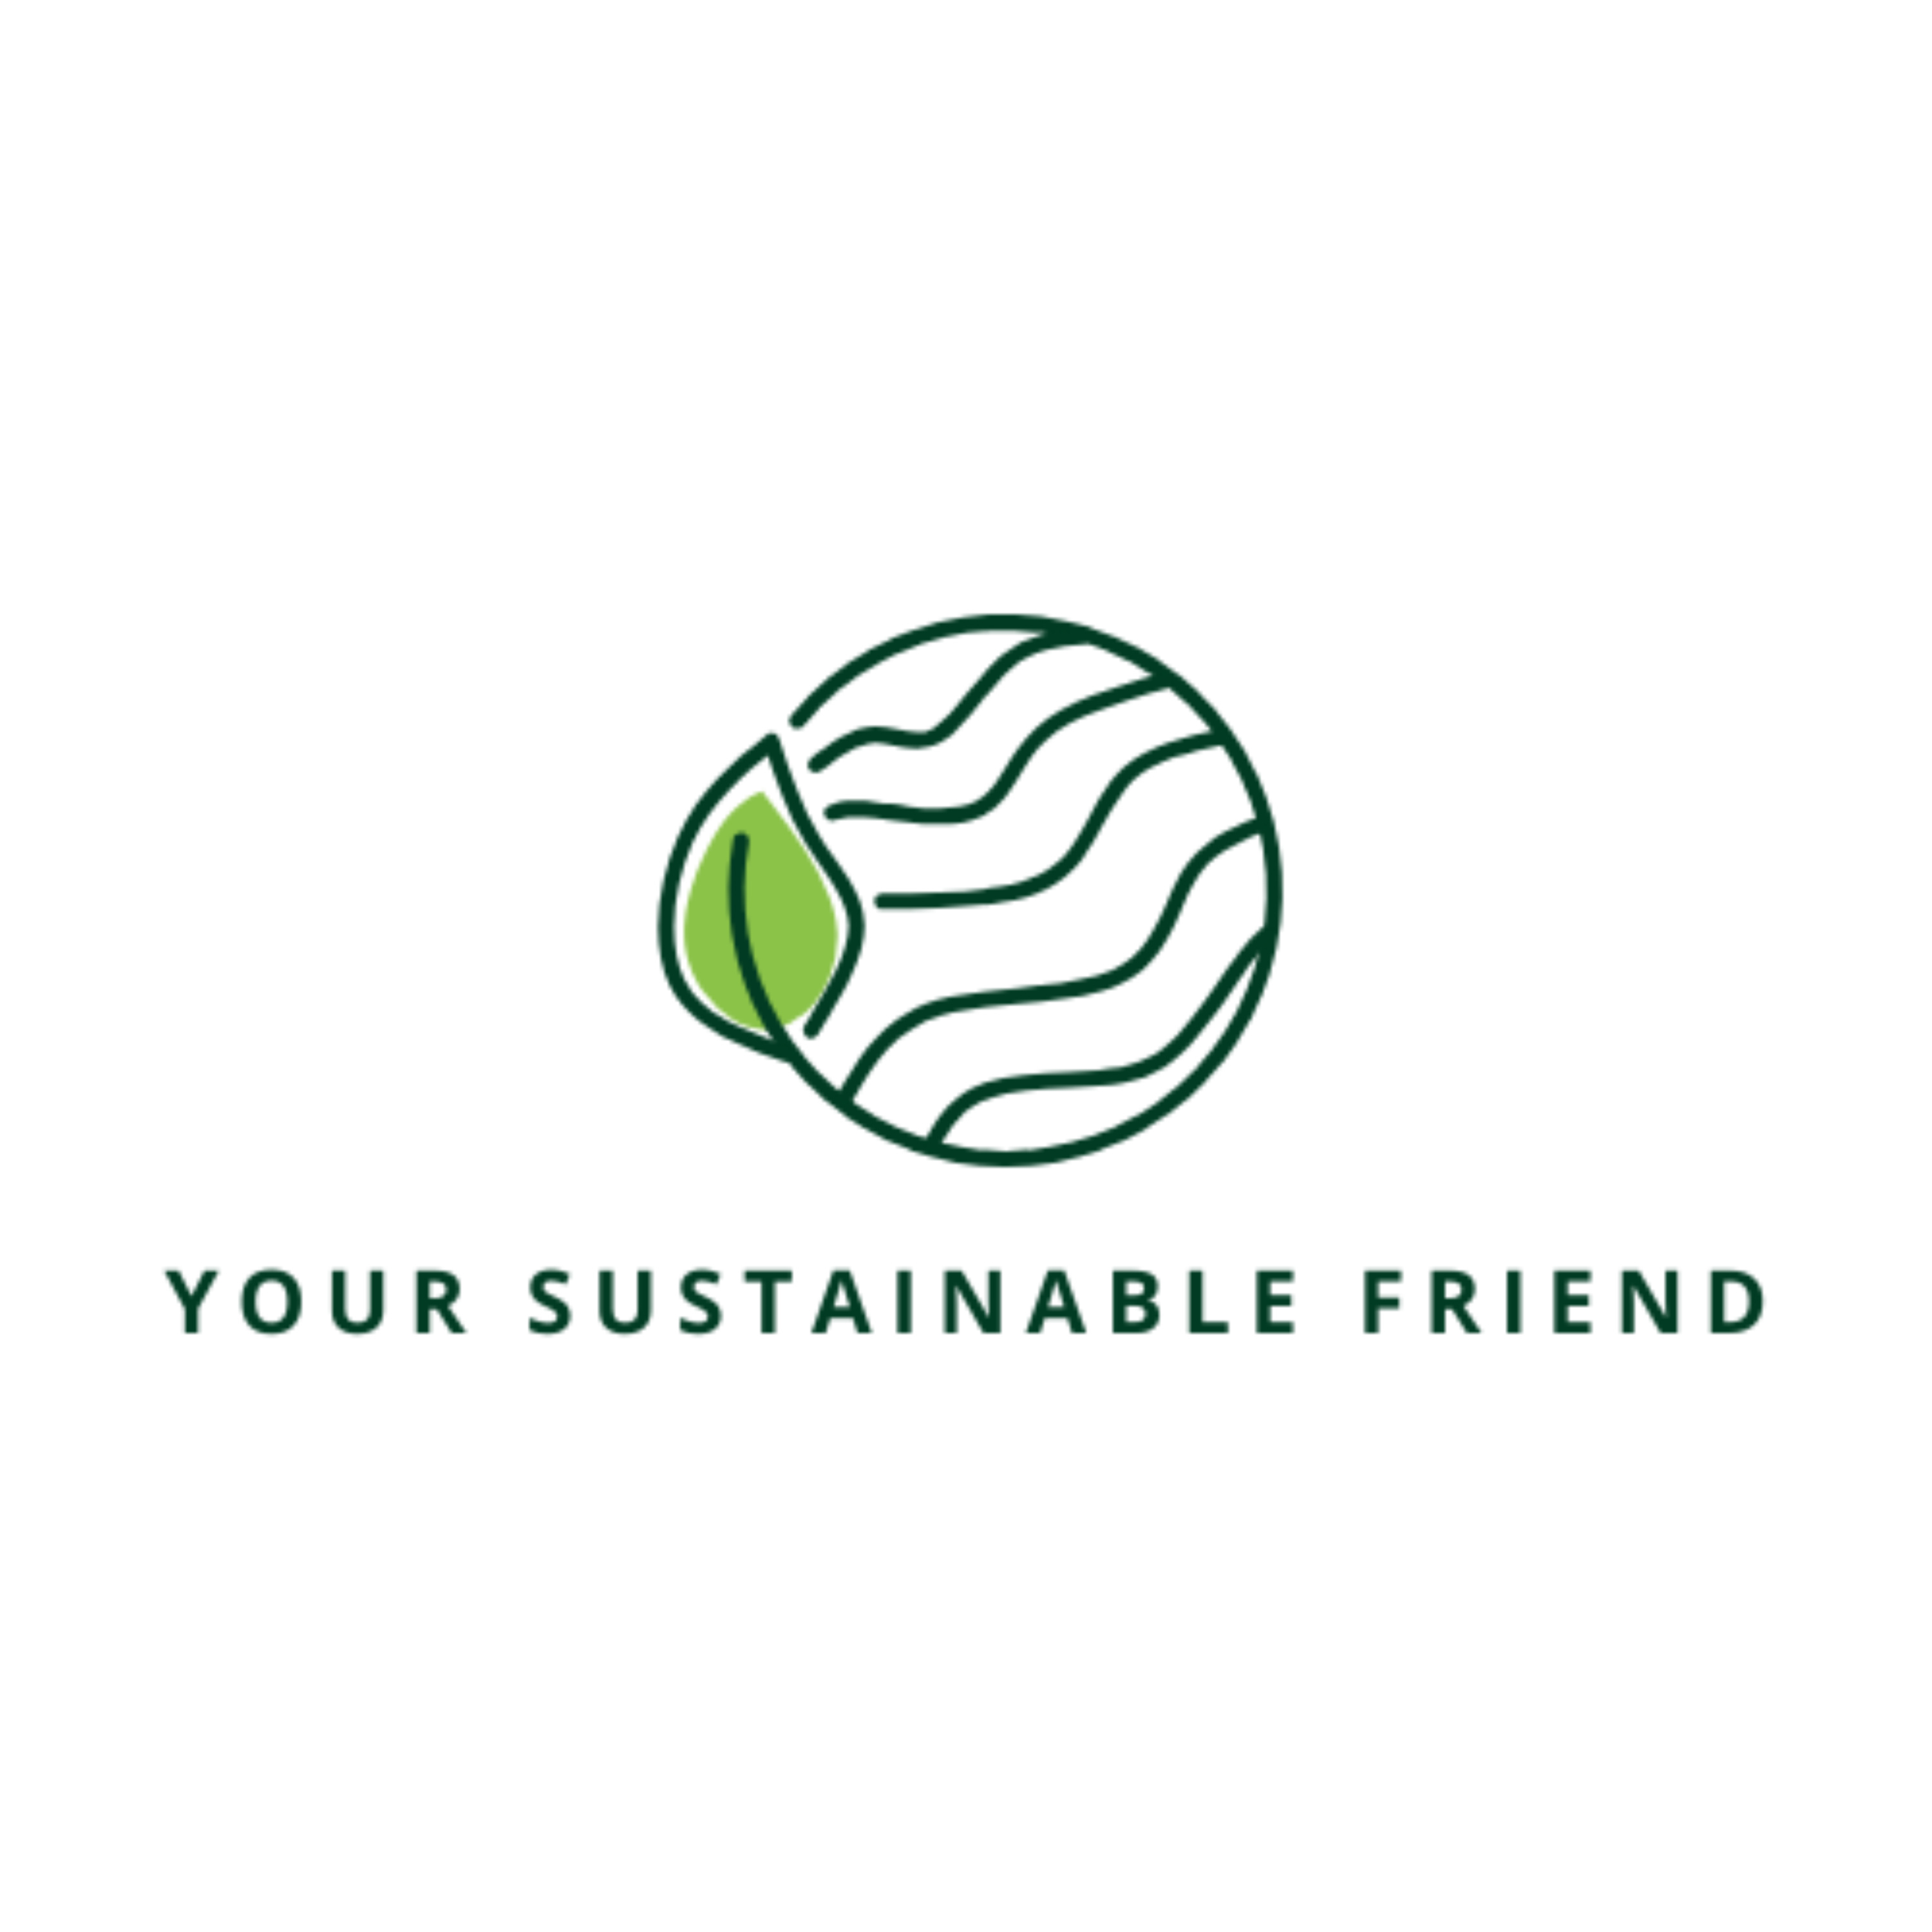 Your Sustainable Friend